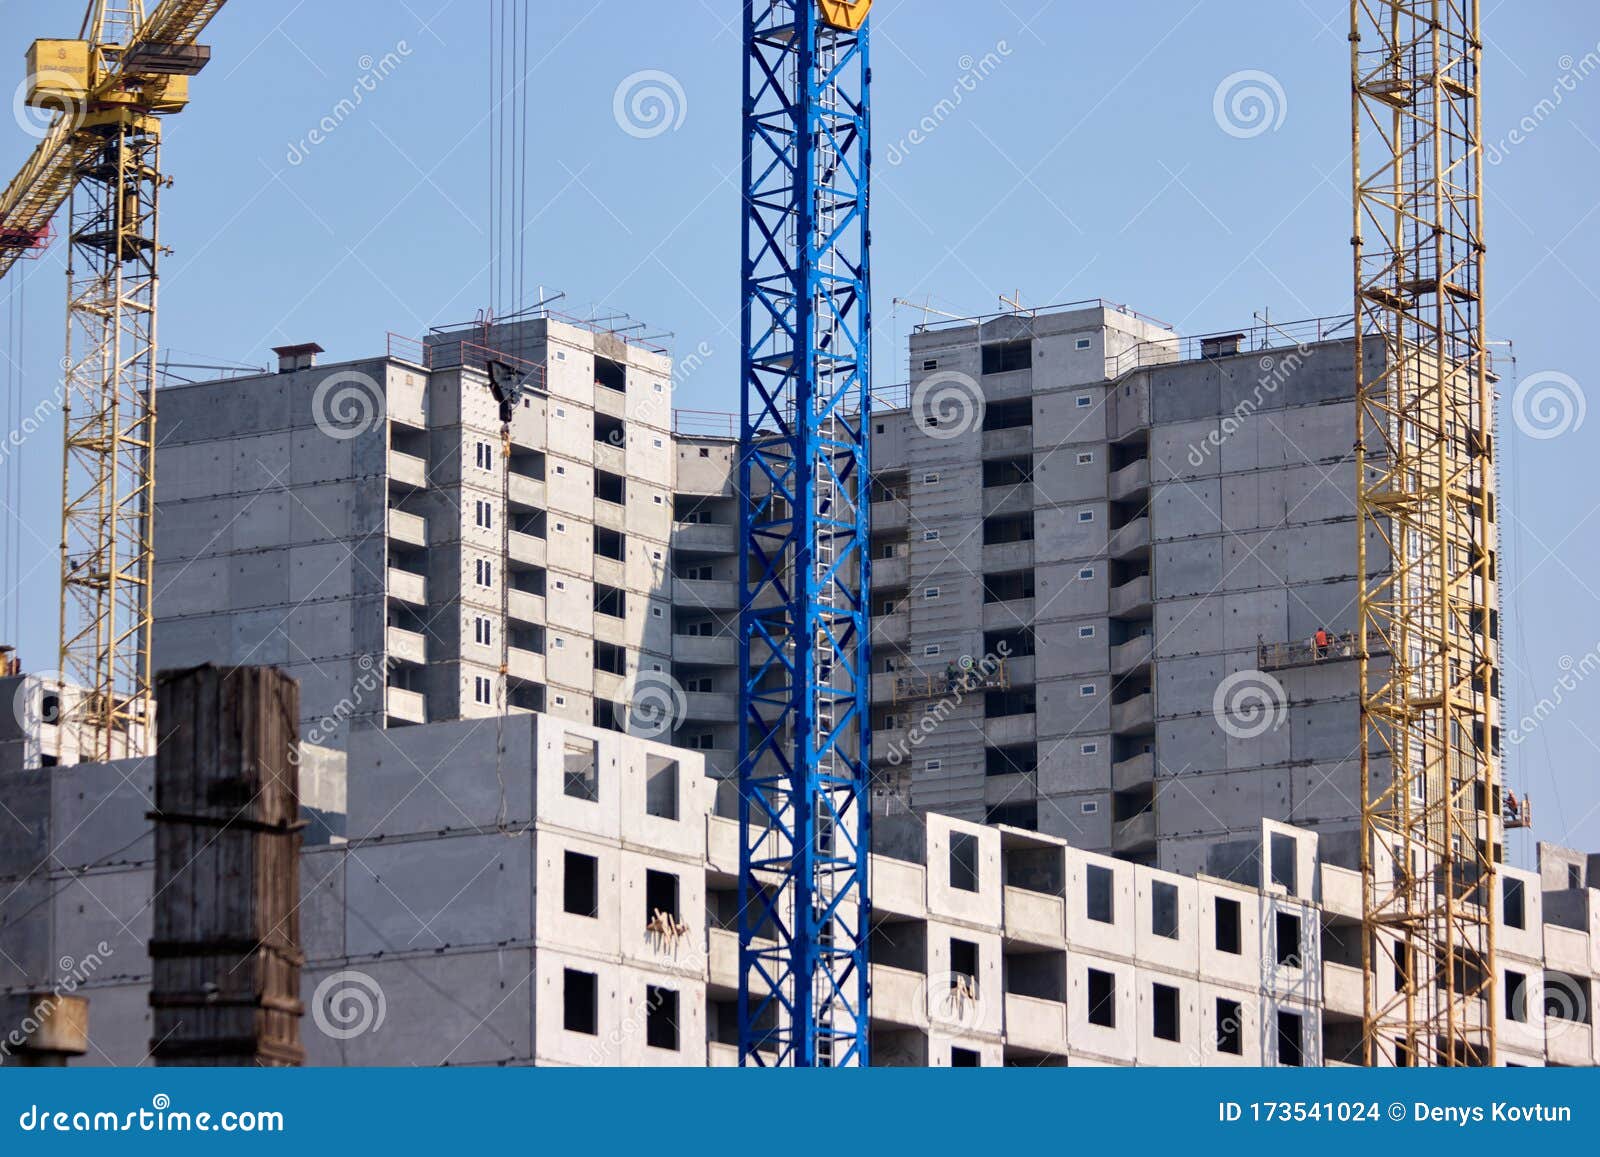 Unfinished Cement Building at a Construction Site. Stock Photo - Image